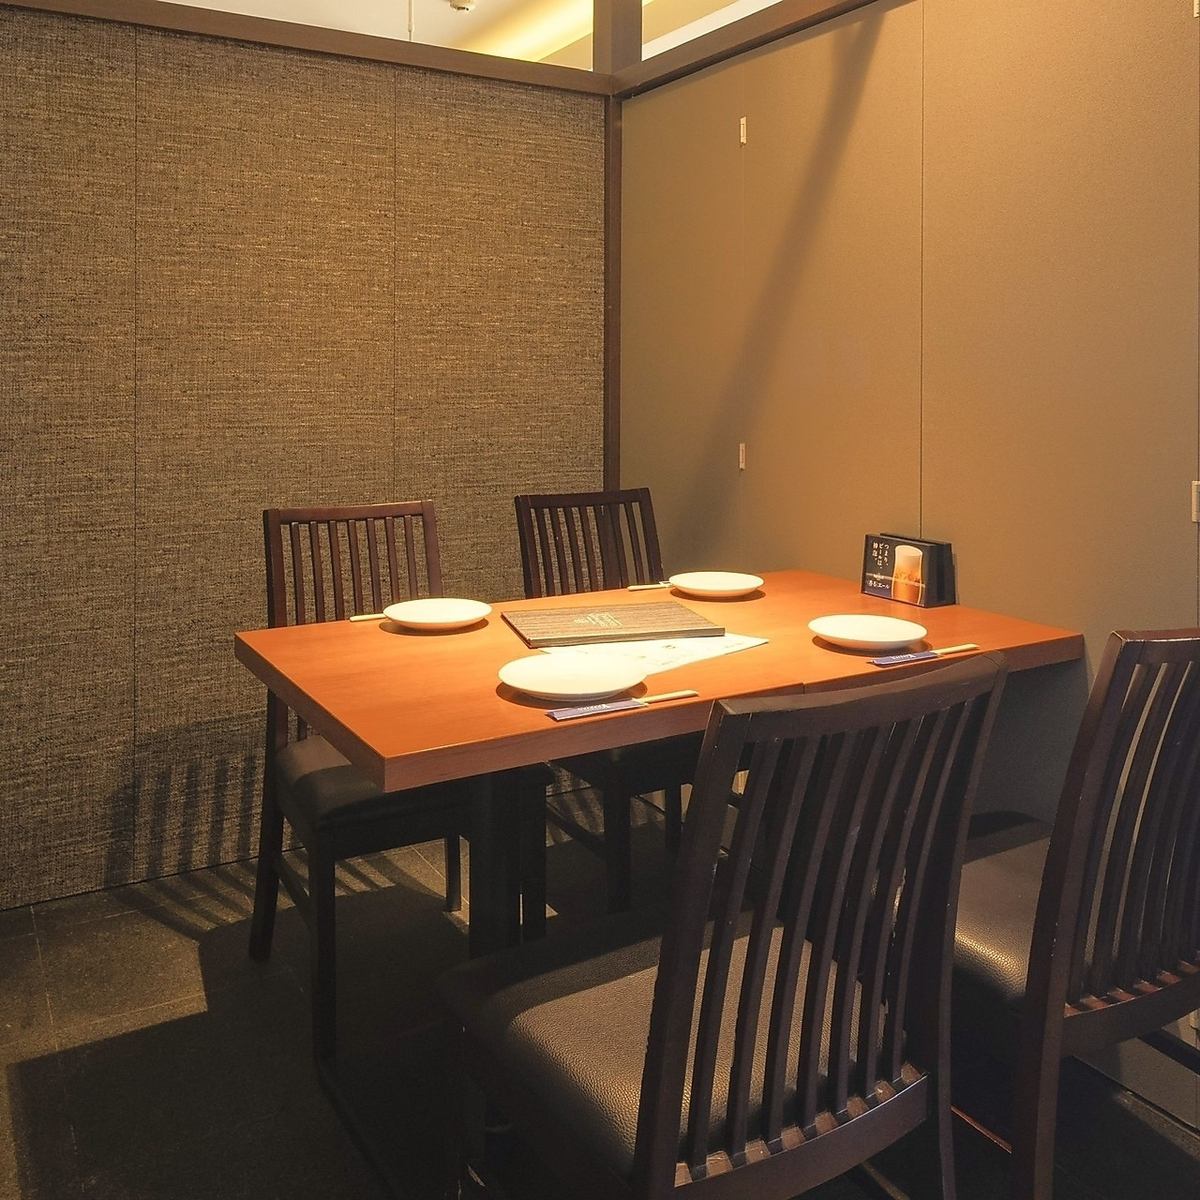 Fully equipped with private rooms♪ Available for 2 people or more! Recommended for dates and parties!